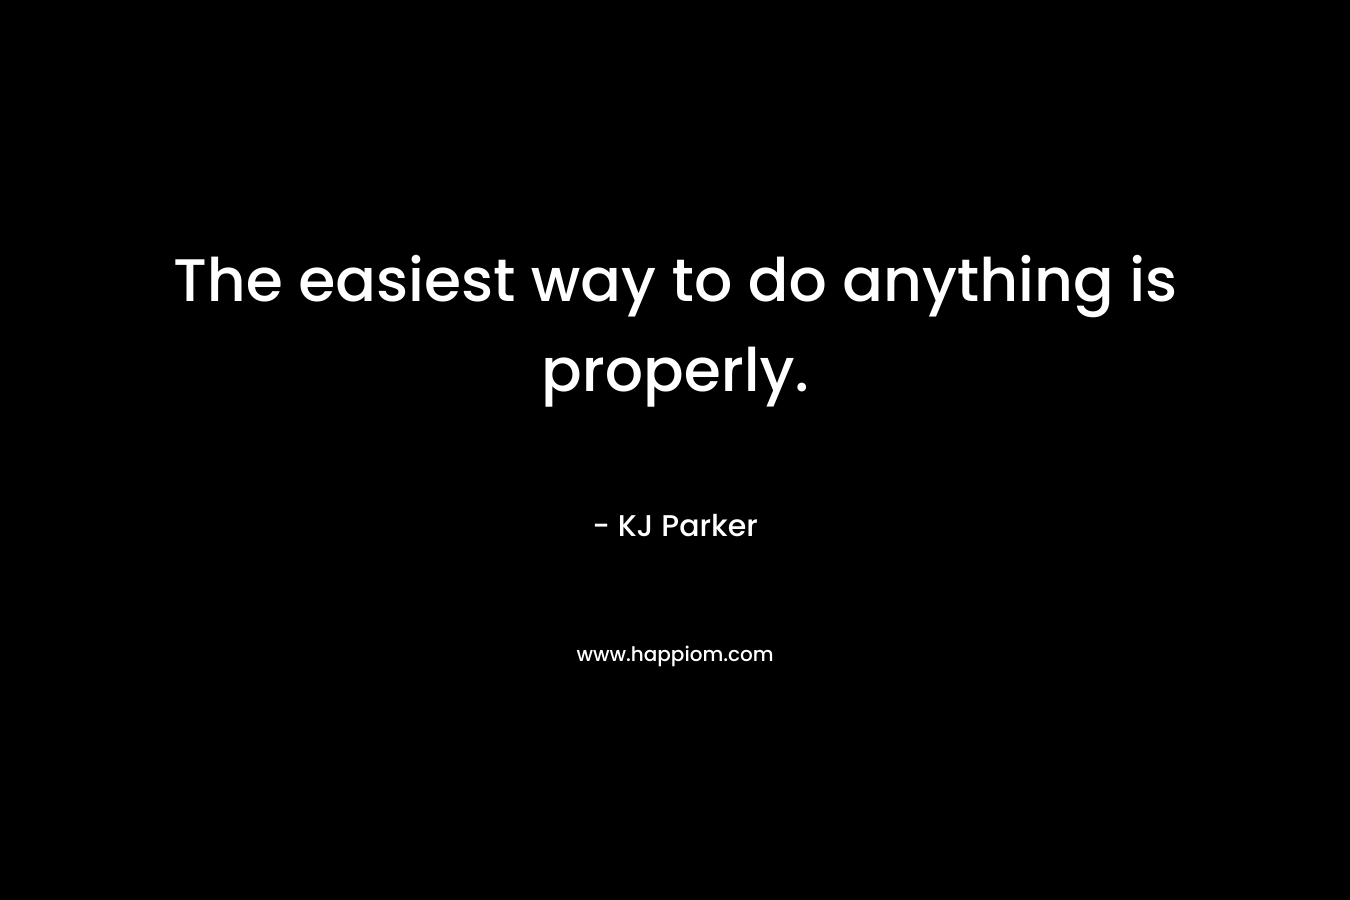 The easiest way to do anything is properly.